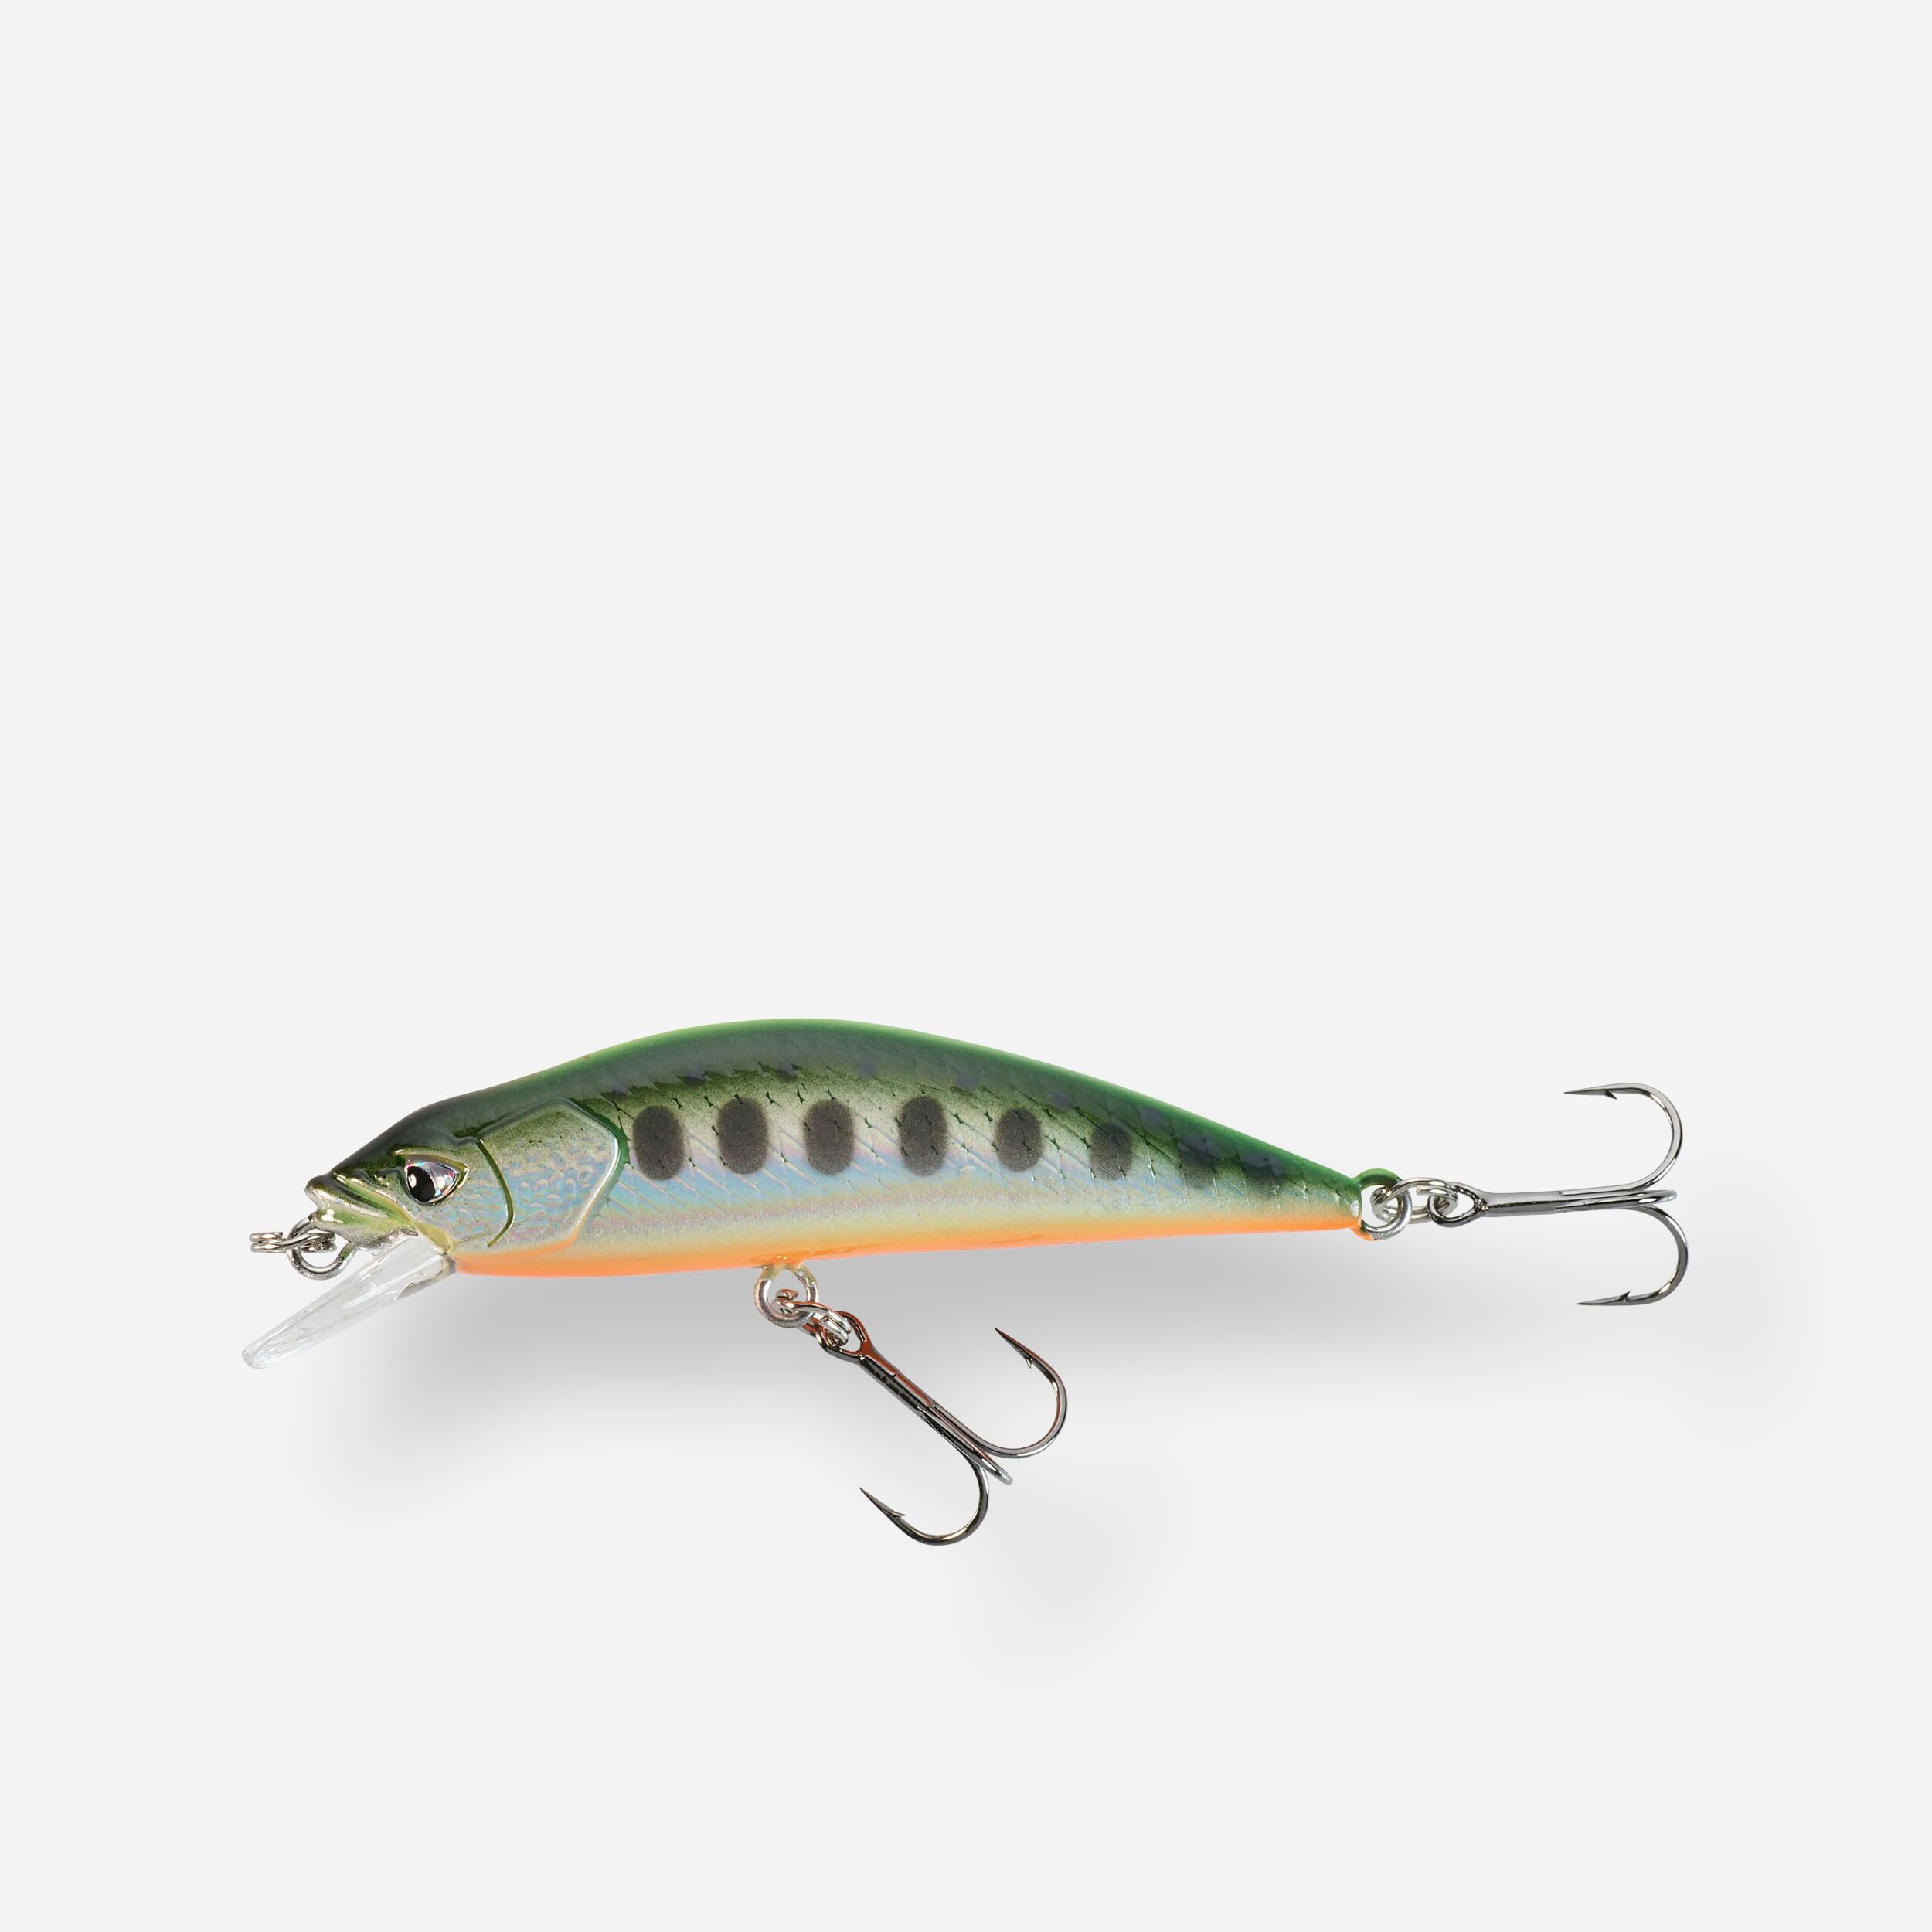 CAPERLAN MINNOW HARD LURE FOR TROUT WXM  MNWFS 50 US YAMAME - NEON 